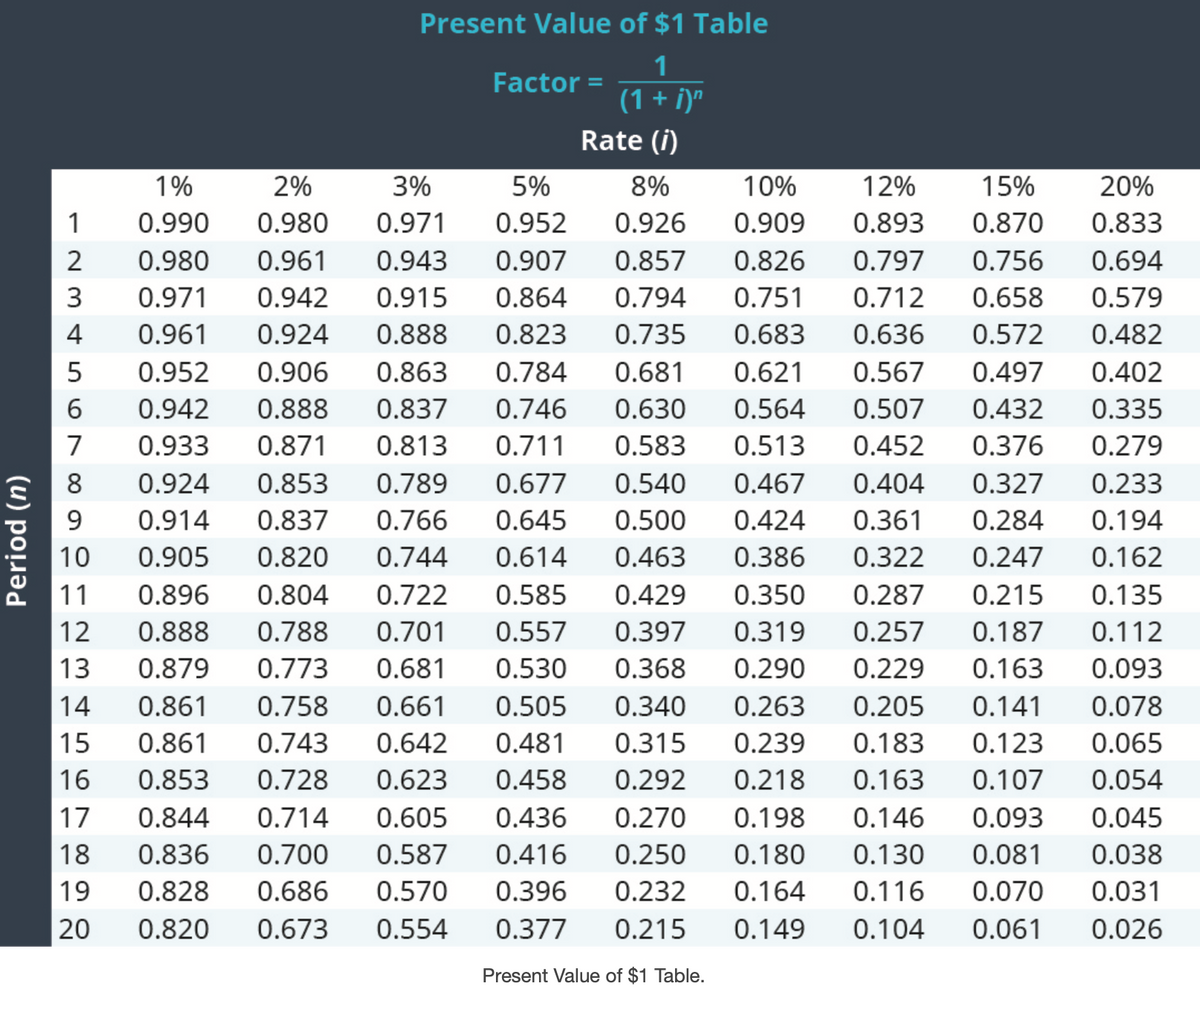 Present Value of $1 Table
1
Factor =
(1 + i)"
Rate (i)
1%
2%
3%
5%
8%
10%
12%
15%
20%
1
0.990
0.980
0.971
0.952
0.926
0.909
0.893
0.870
0.833
2
0.980
0.961
0.943
0.907
0.857
0.826
0.797
0.756
0.694
0.971
0.942
0.915
0.864
0.794
0.751
0.712
0.658
0.579
4
0.961
0.924
0.888
0.823
0.735
0.683
0.636
0.572
0.482
0.952
0.906
0.863
0.784
0.681
0.621
0.567
0.497
0.402
6.
0.942
0.888
0.837
0.746
0.630
0.564
0.507
0.432
0.335
7
0.933
0.871
0.813
0.711
0.583
0.513
0.452
0.376
0.279
8.
0.924
0.853
0.789
0.677
0.540
0.467
0.404
0.327
0.233
9.
0.914
0.837
0.766
0.645
0.500
0.424
0.361
0.284
0.194
10
0.905
0.820
0.744
0.614
0.463
0.386
0.322
0.247
0.162
11
0.896
0.804
0.722
0.585
0.429
0.350
0.287
0.215
0.135
12
0.888
0.788
0.701
0.557
0.397
0.319
0.257
0.187
0.112
13
0.879
0.773
0.681
0.530
0.368
0.290
0.229
0.163
0.093
14
0.861
0.758
0.661
0.505
0.340
0.263
0.205
0.141
0.078
15
0.861
0.743
0.642
0.481
0.315
0.239
0.183
0.123
0.065
16
0.853
0.728
0.623
0.458
0.292
0.218
0.163
0.107
0.054
17
0.844
0.714
0.605
0.436
0.270
0.198
0.146
0.093
0.045
18
0.836
0.700
0.587
0.416
0.250
0.180
0.130
0.081
0.038
19
0.828
0.686
0.570
0.396
0.232
0.164
0.116
0.070
0.031
20
0.820
0.673
0.554
0.377
0.215
0.149
0.104
0.061
0.026
Present Value of $1 Table.
Period (n)
